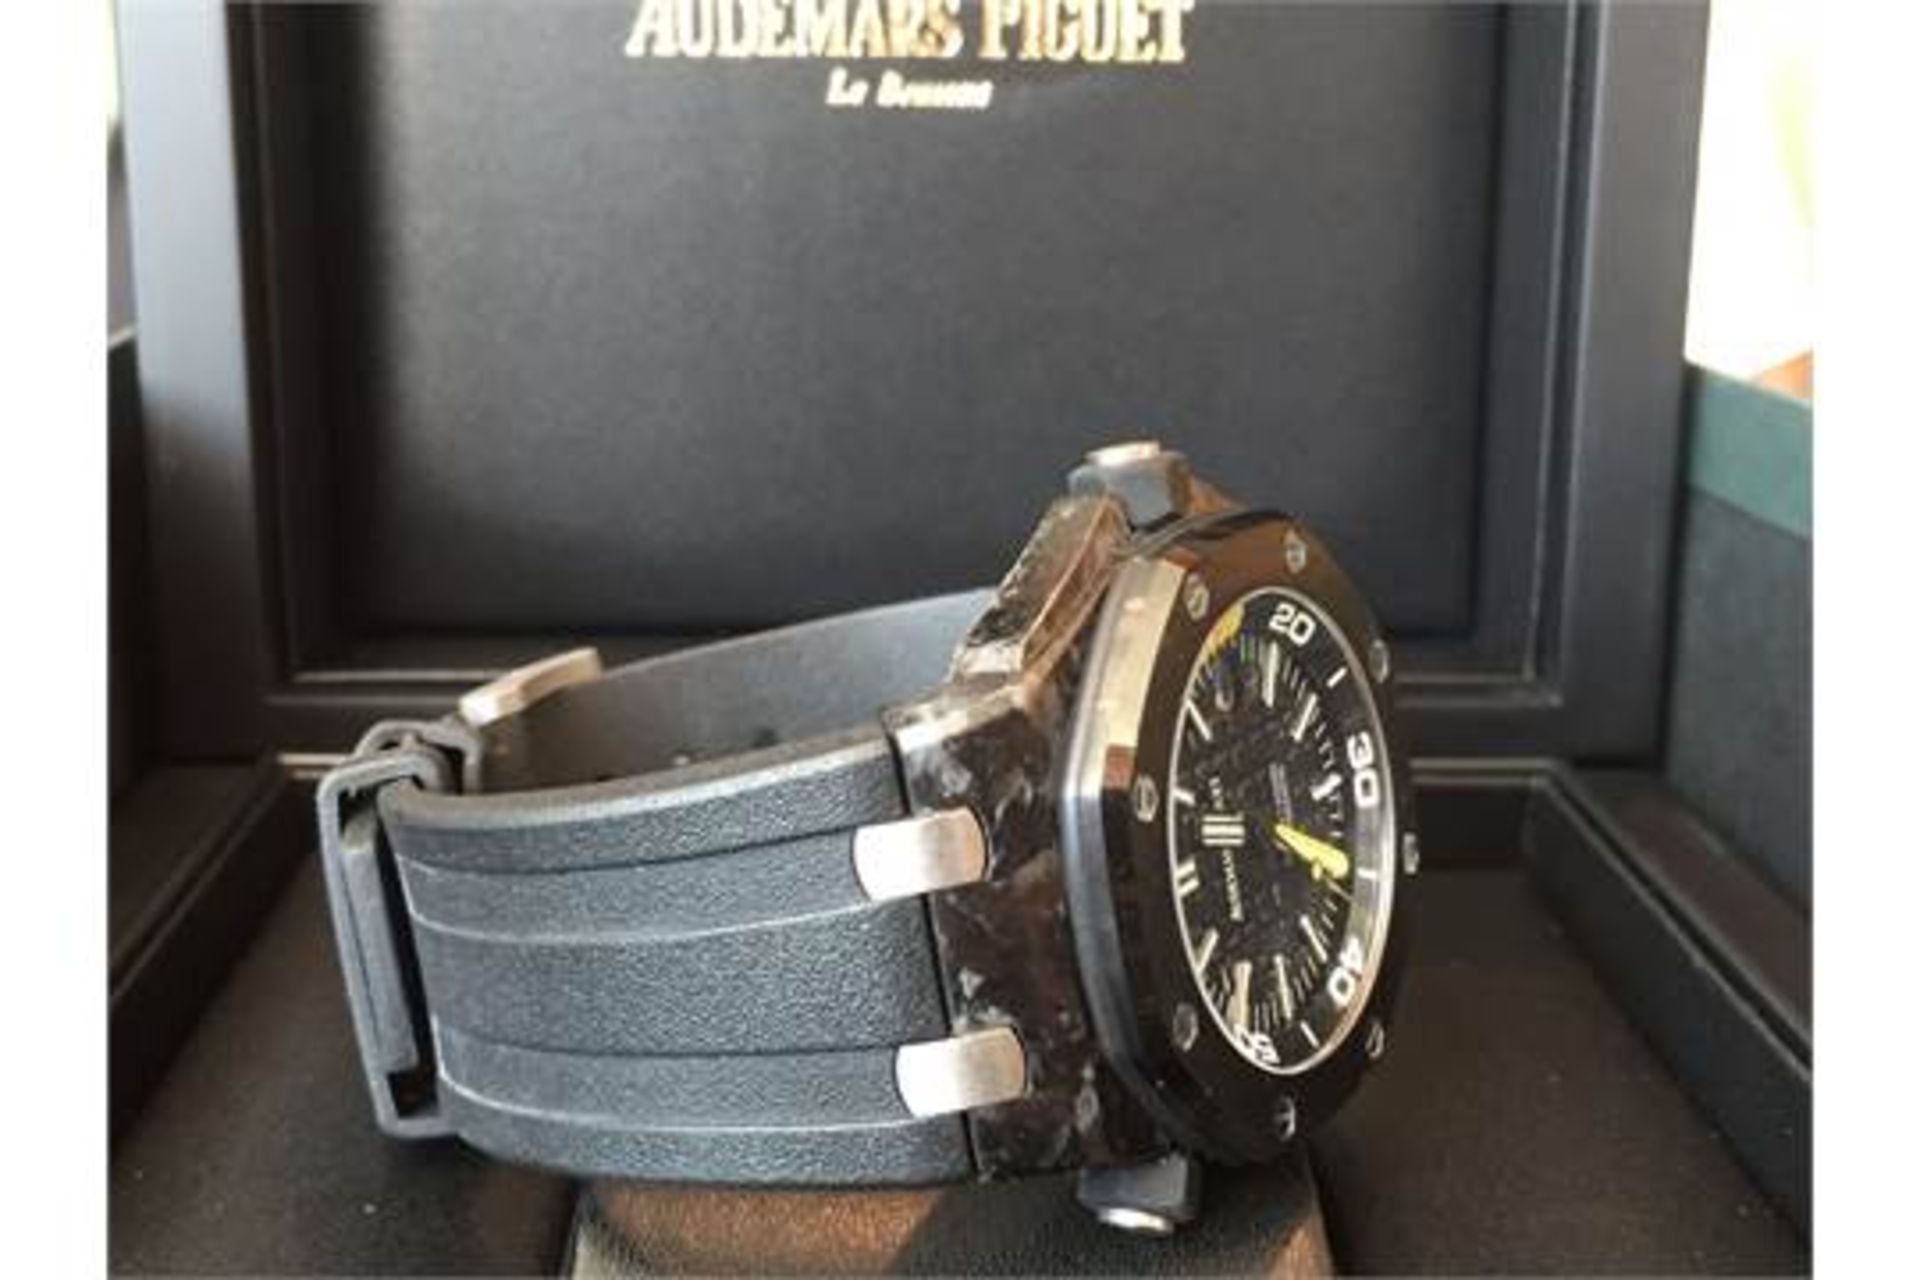 RRP PRROX £19,000 2014 AUDEMARS PIGUET ROYAL OAK OFF SHORE 44ml CERAMIC MODEL WITH BOX & PAPERS ON - Image 3 of 9